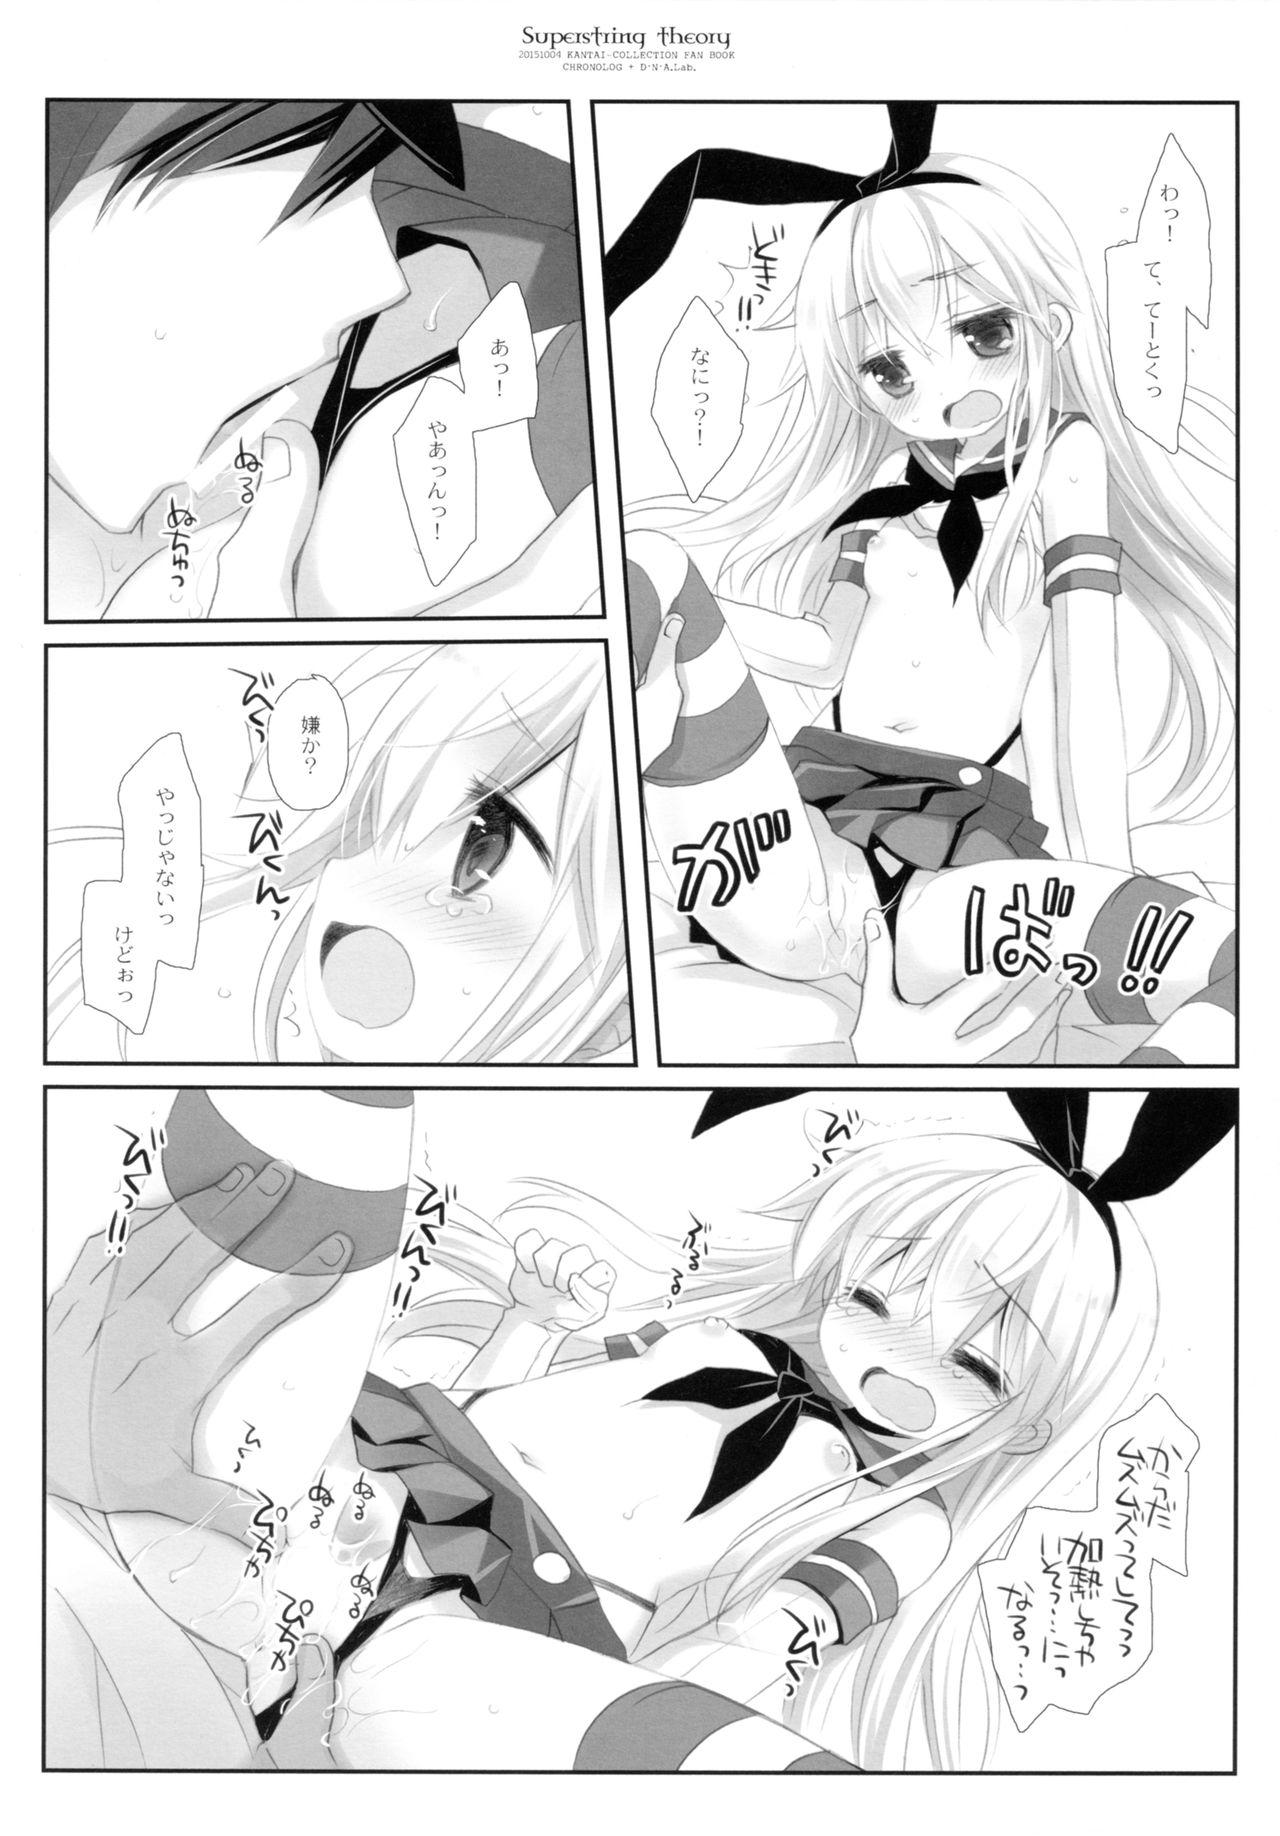 Selfie Super String Theory - Kantai collection Twinkstudios - Page 7